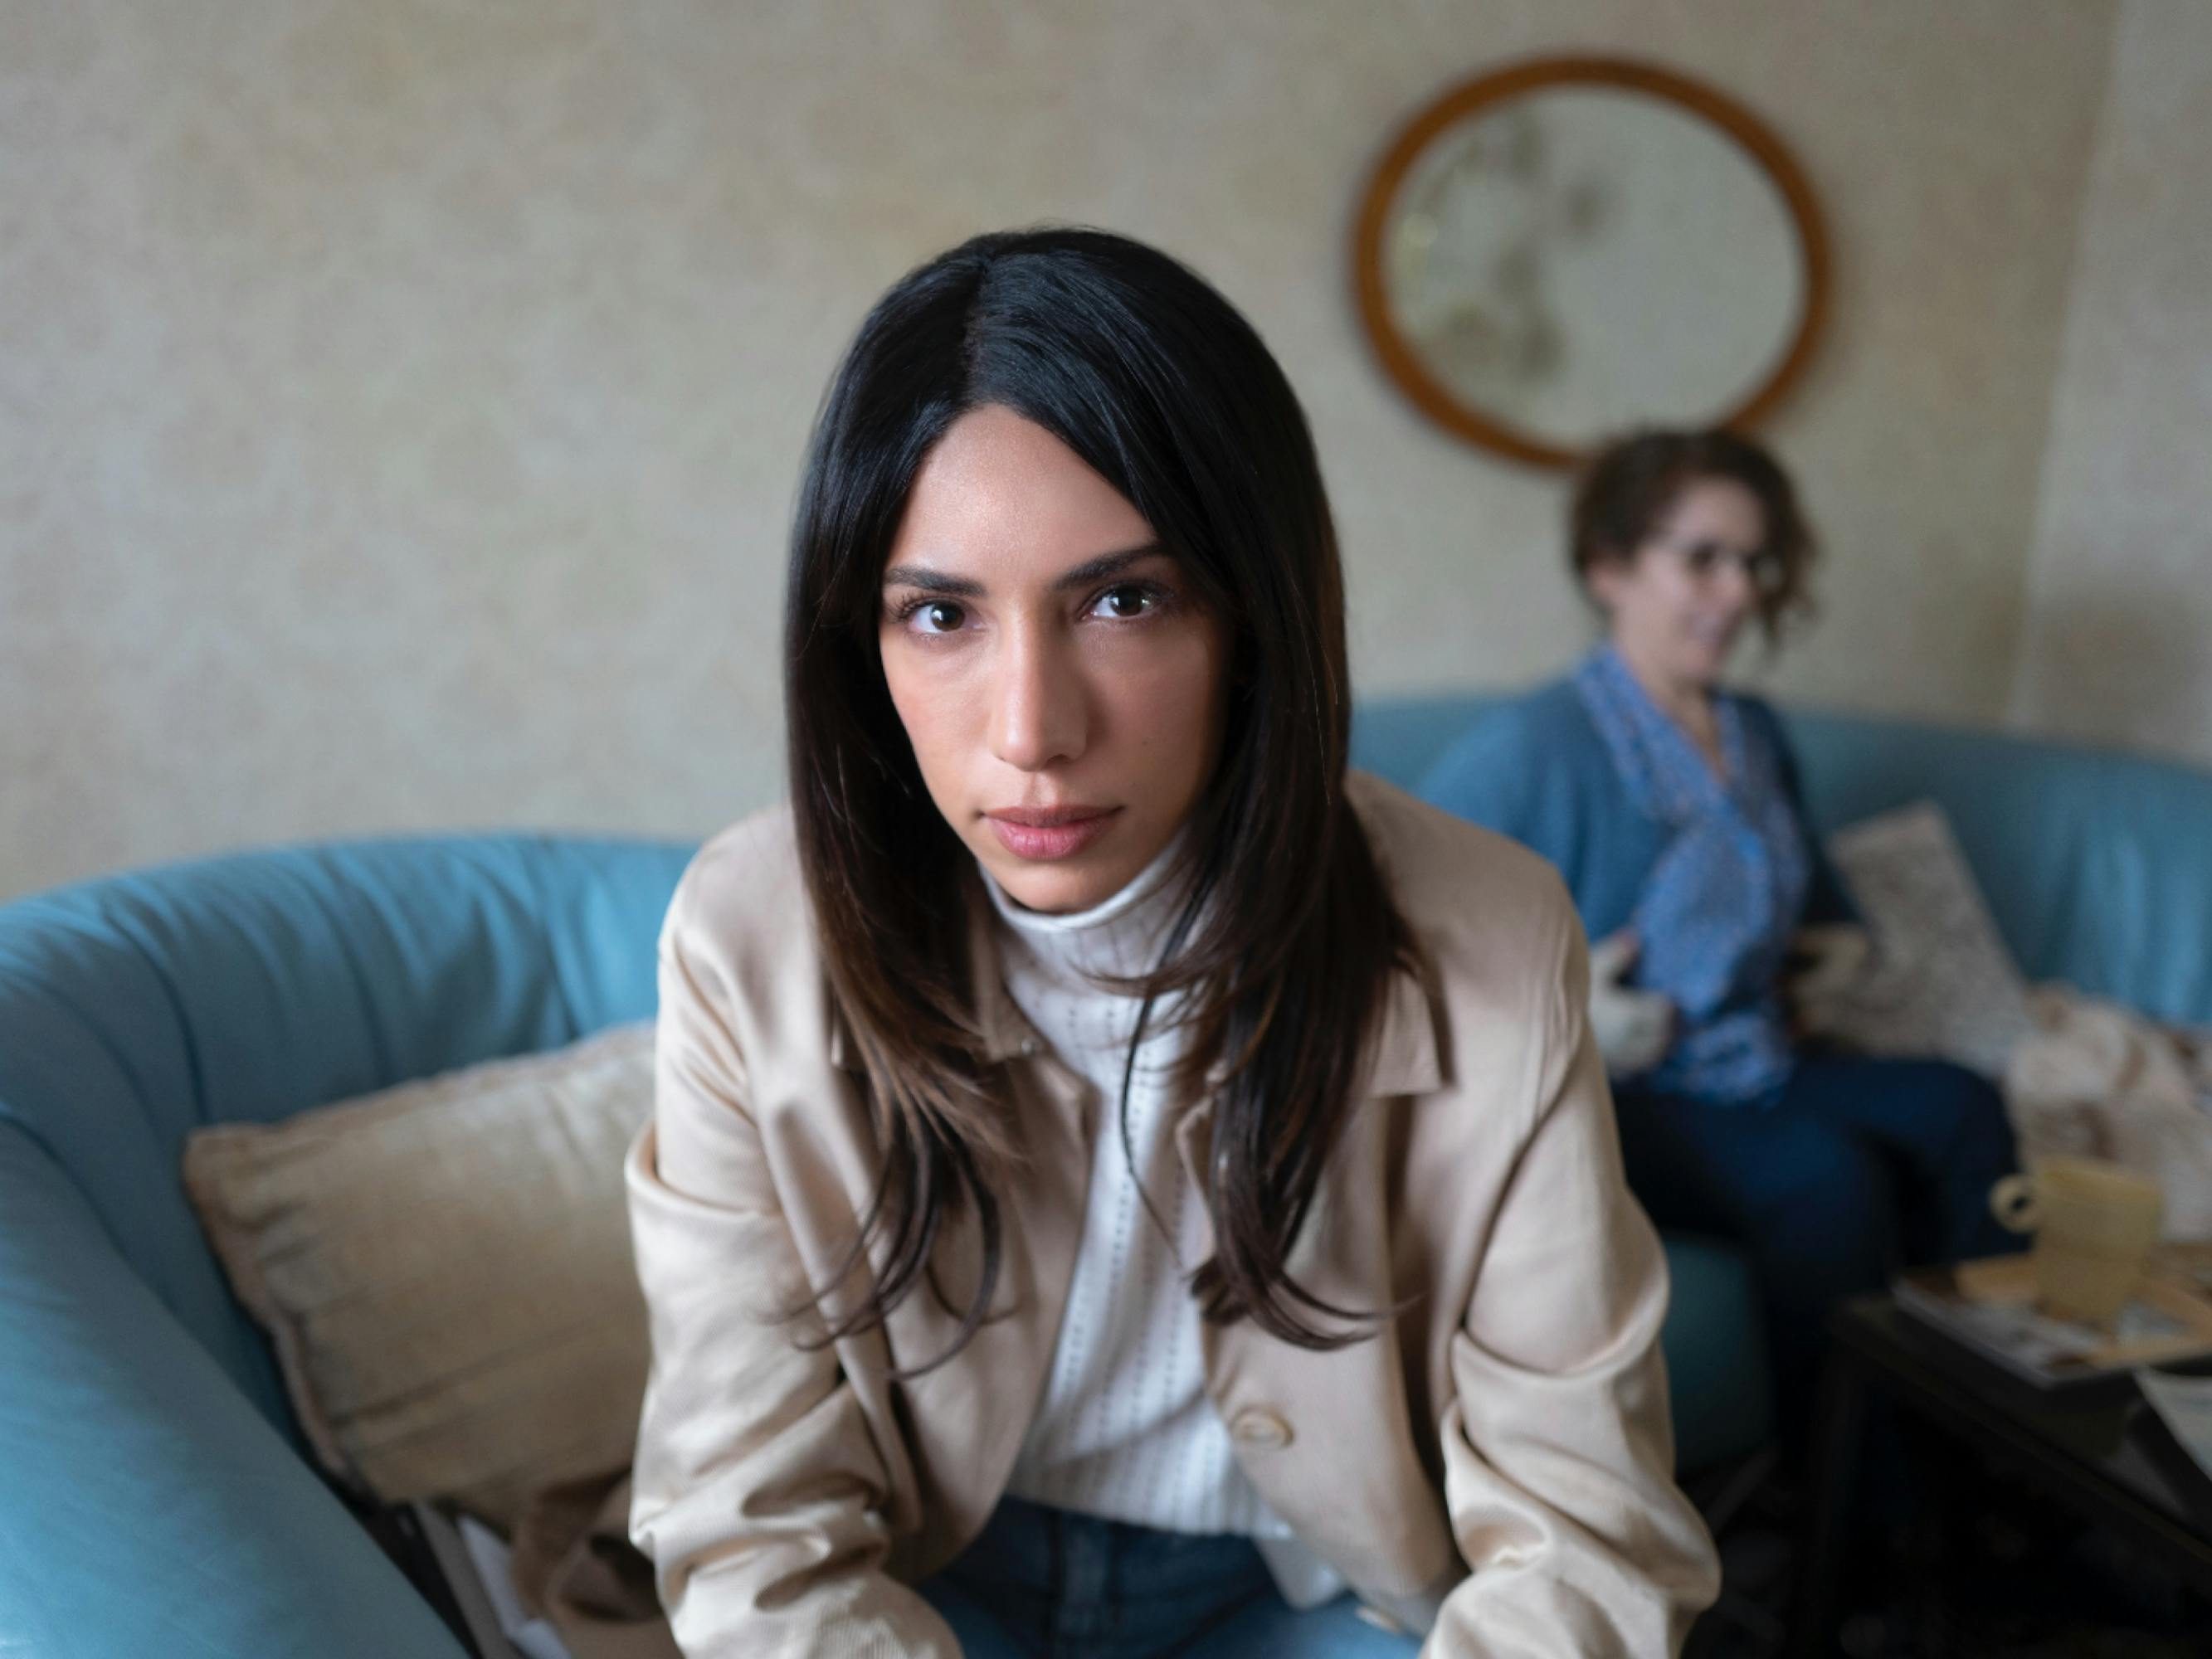 Evin Ahmad, who plays Leya, wears a white turtleneck, tan coat, and looks directly at the camera. In the background there is a woman sitting on a turquoise couch.